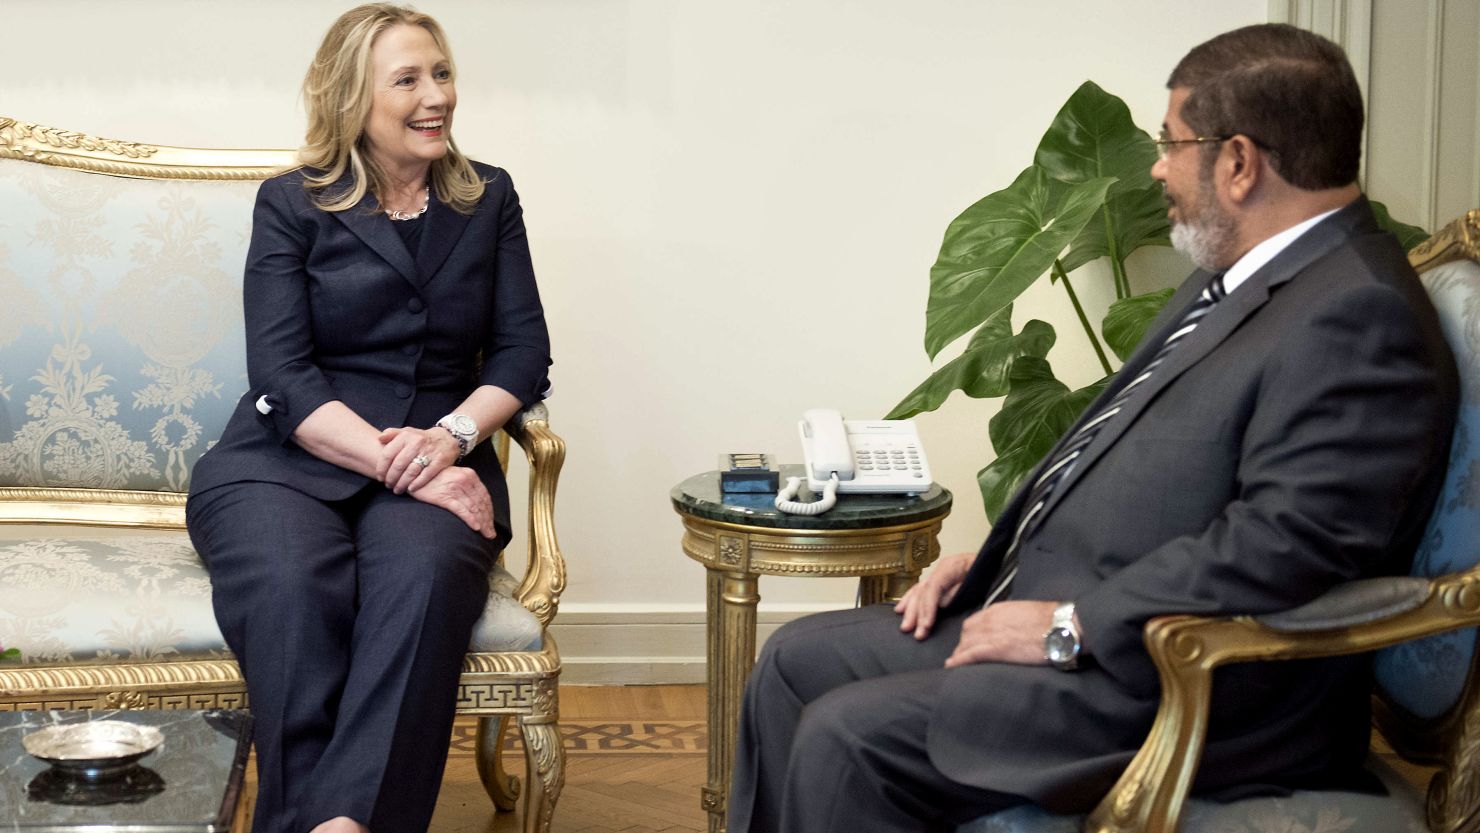 U.S. Secretary of State Hillary Clinton meets with Egyptian President Mohamed Morsy in Cairo on Saturday.